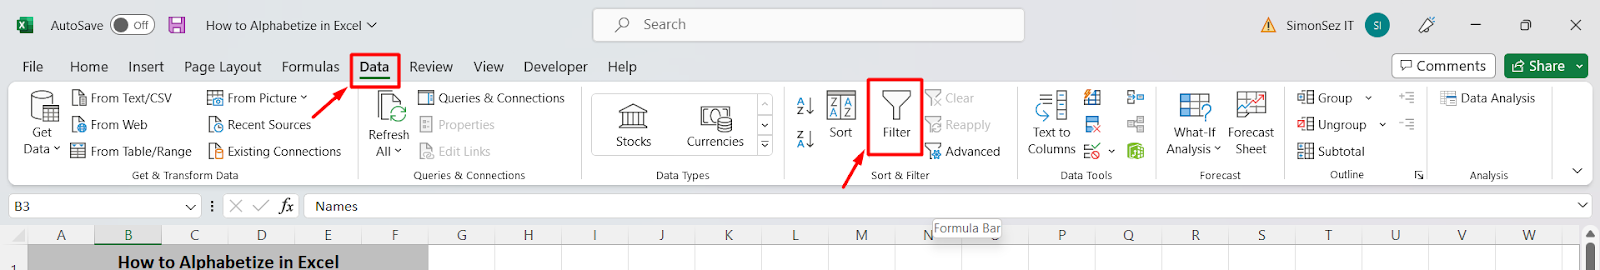 how to alphabetize in Excel- Filter icon